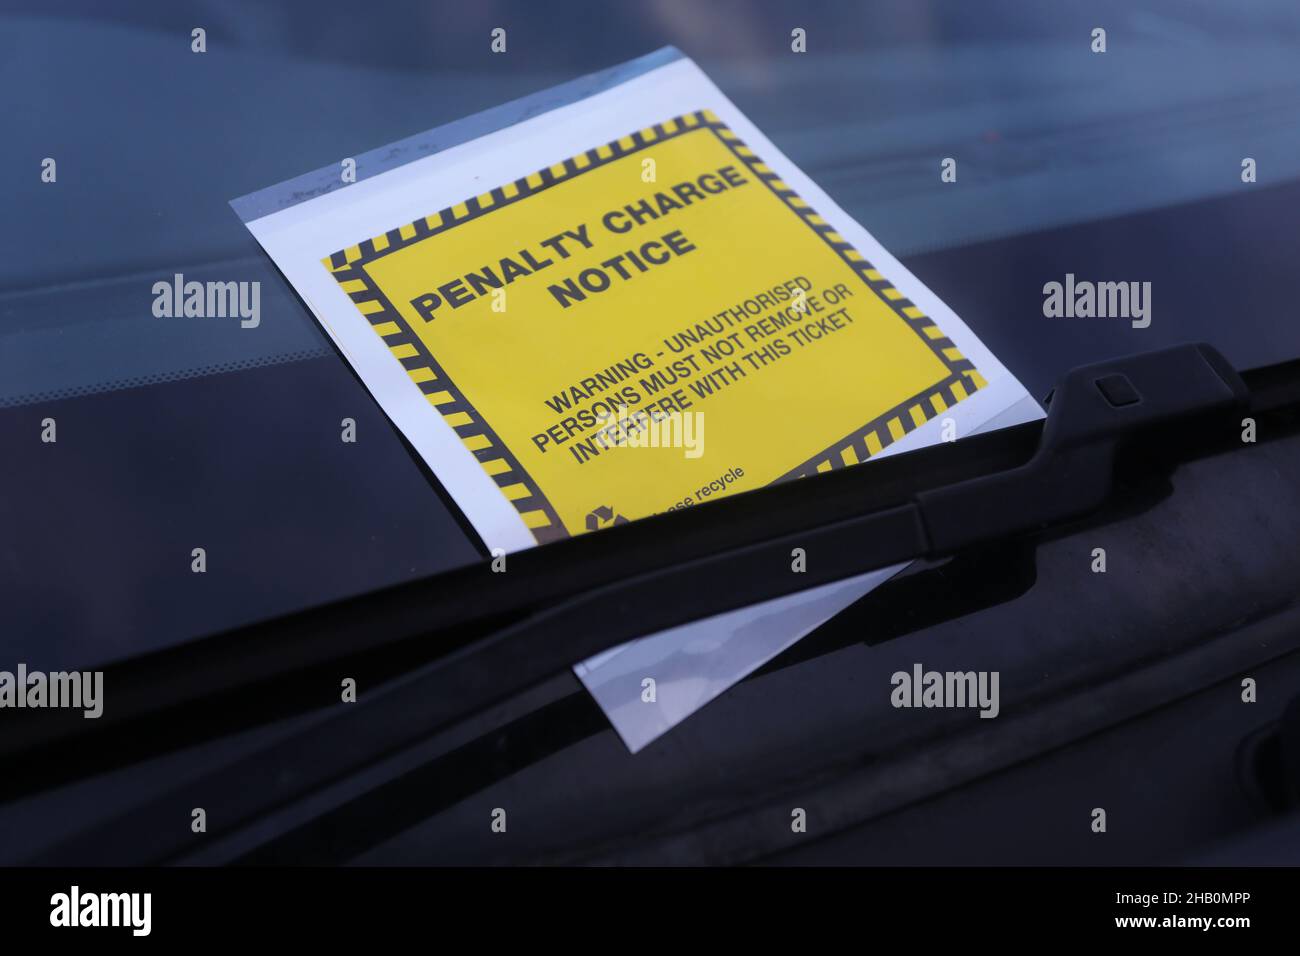 A parking ticket / penalty charge notice pictured on a car in Portsmouth, Hampshire, UK. Stock Photo